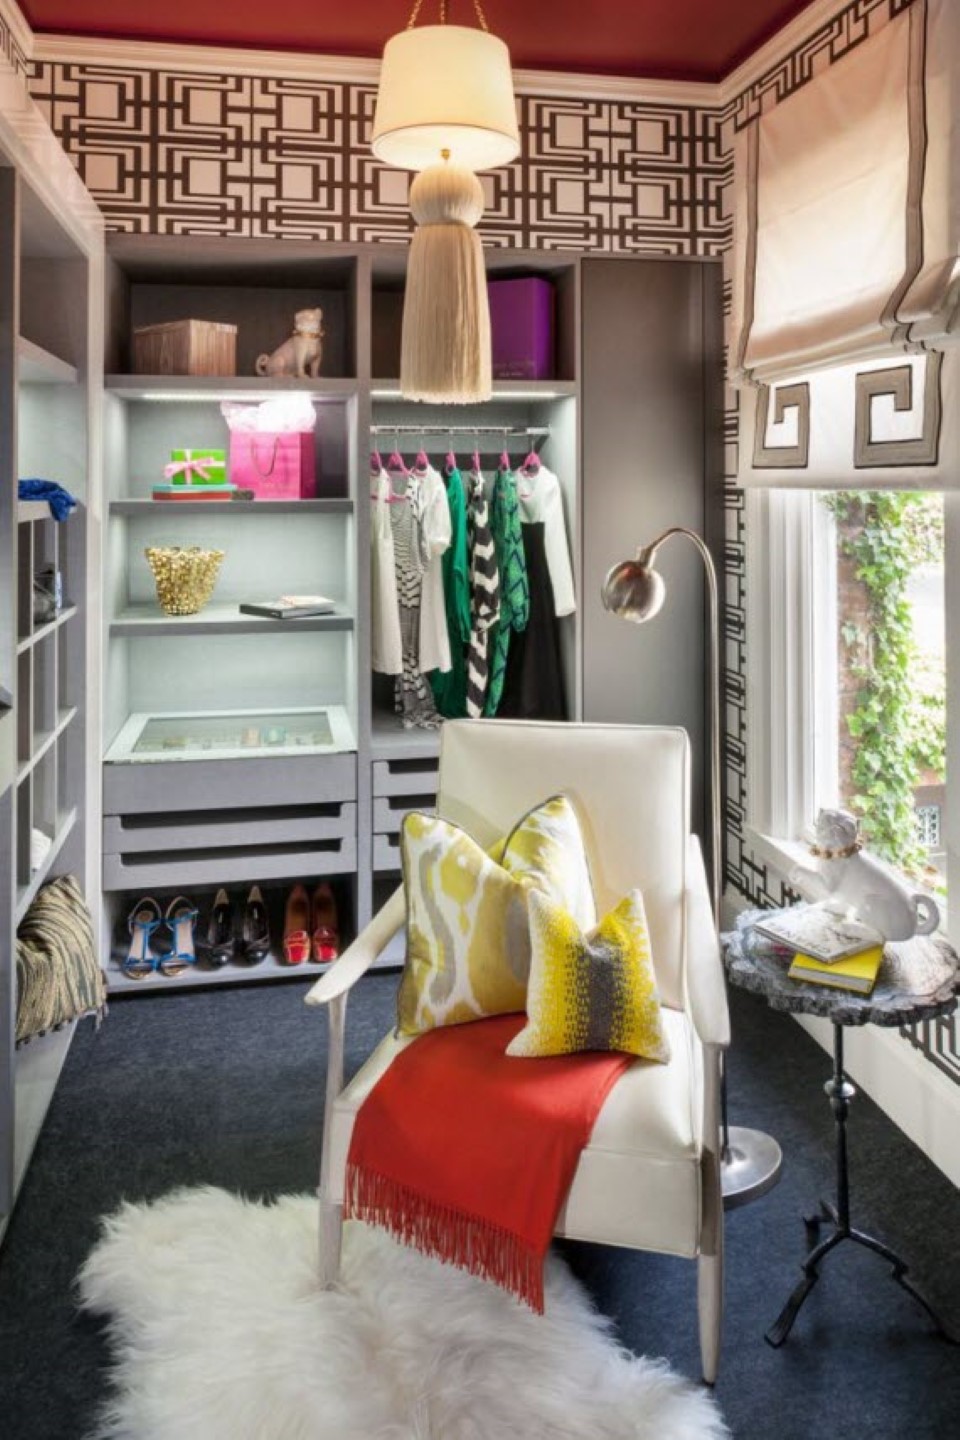 11 Awesome And Creative Colorful Walk In Closet Designs Awesome 11